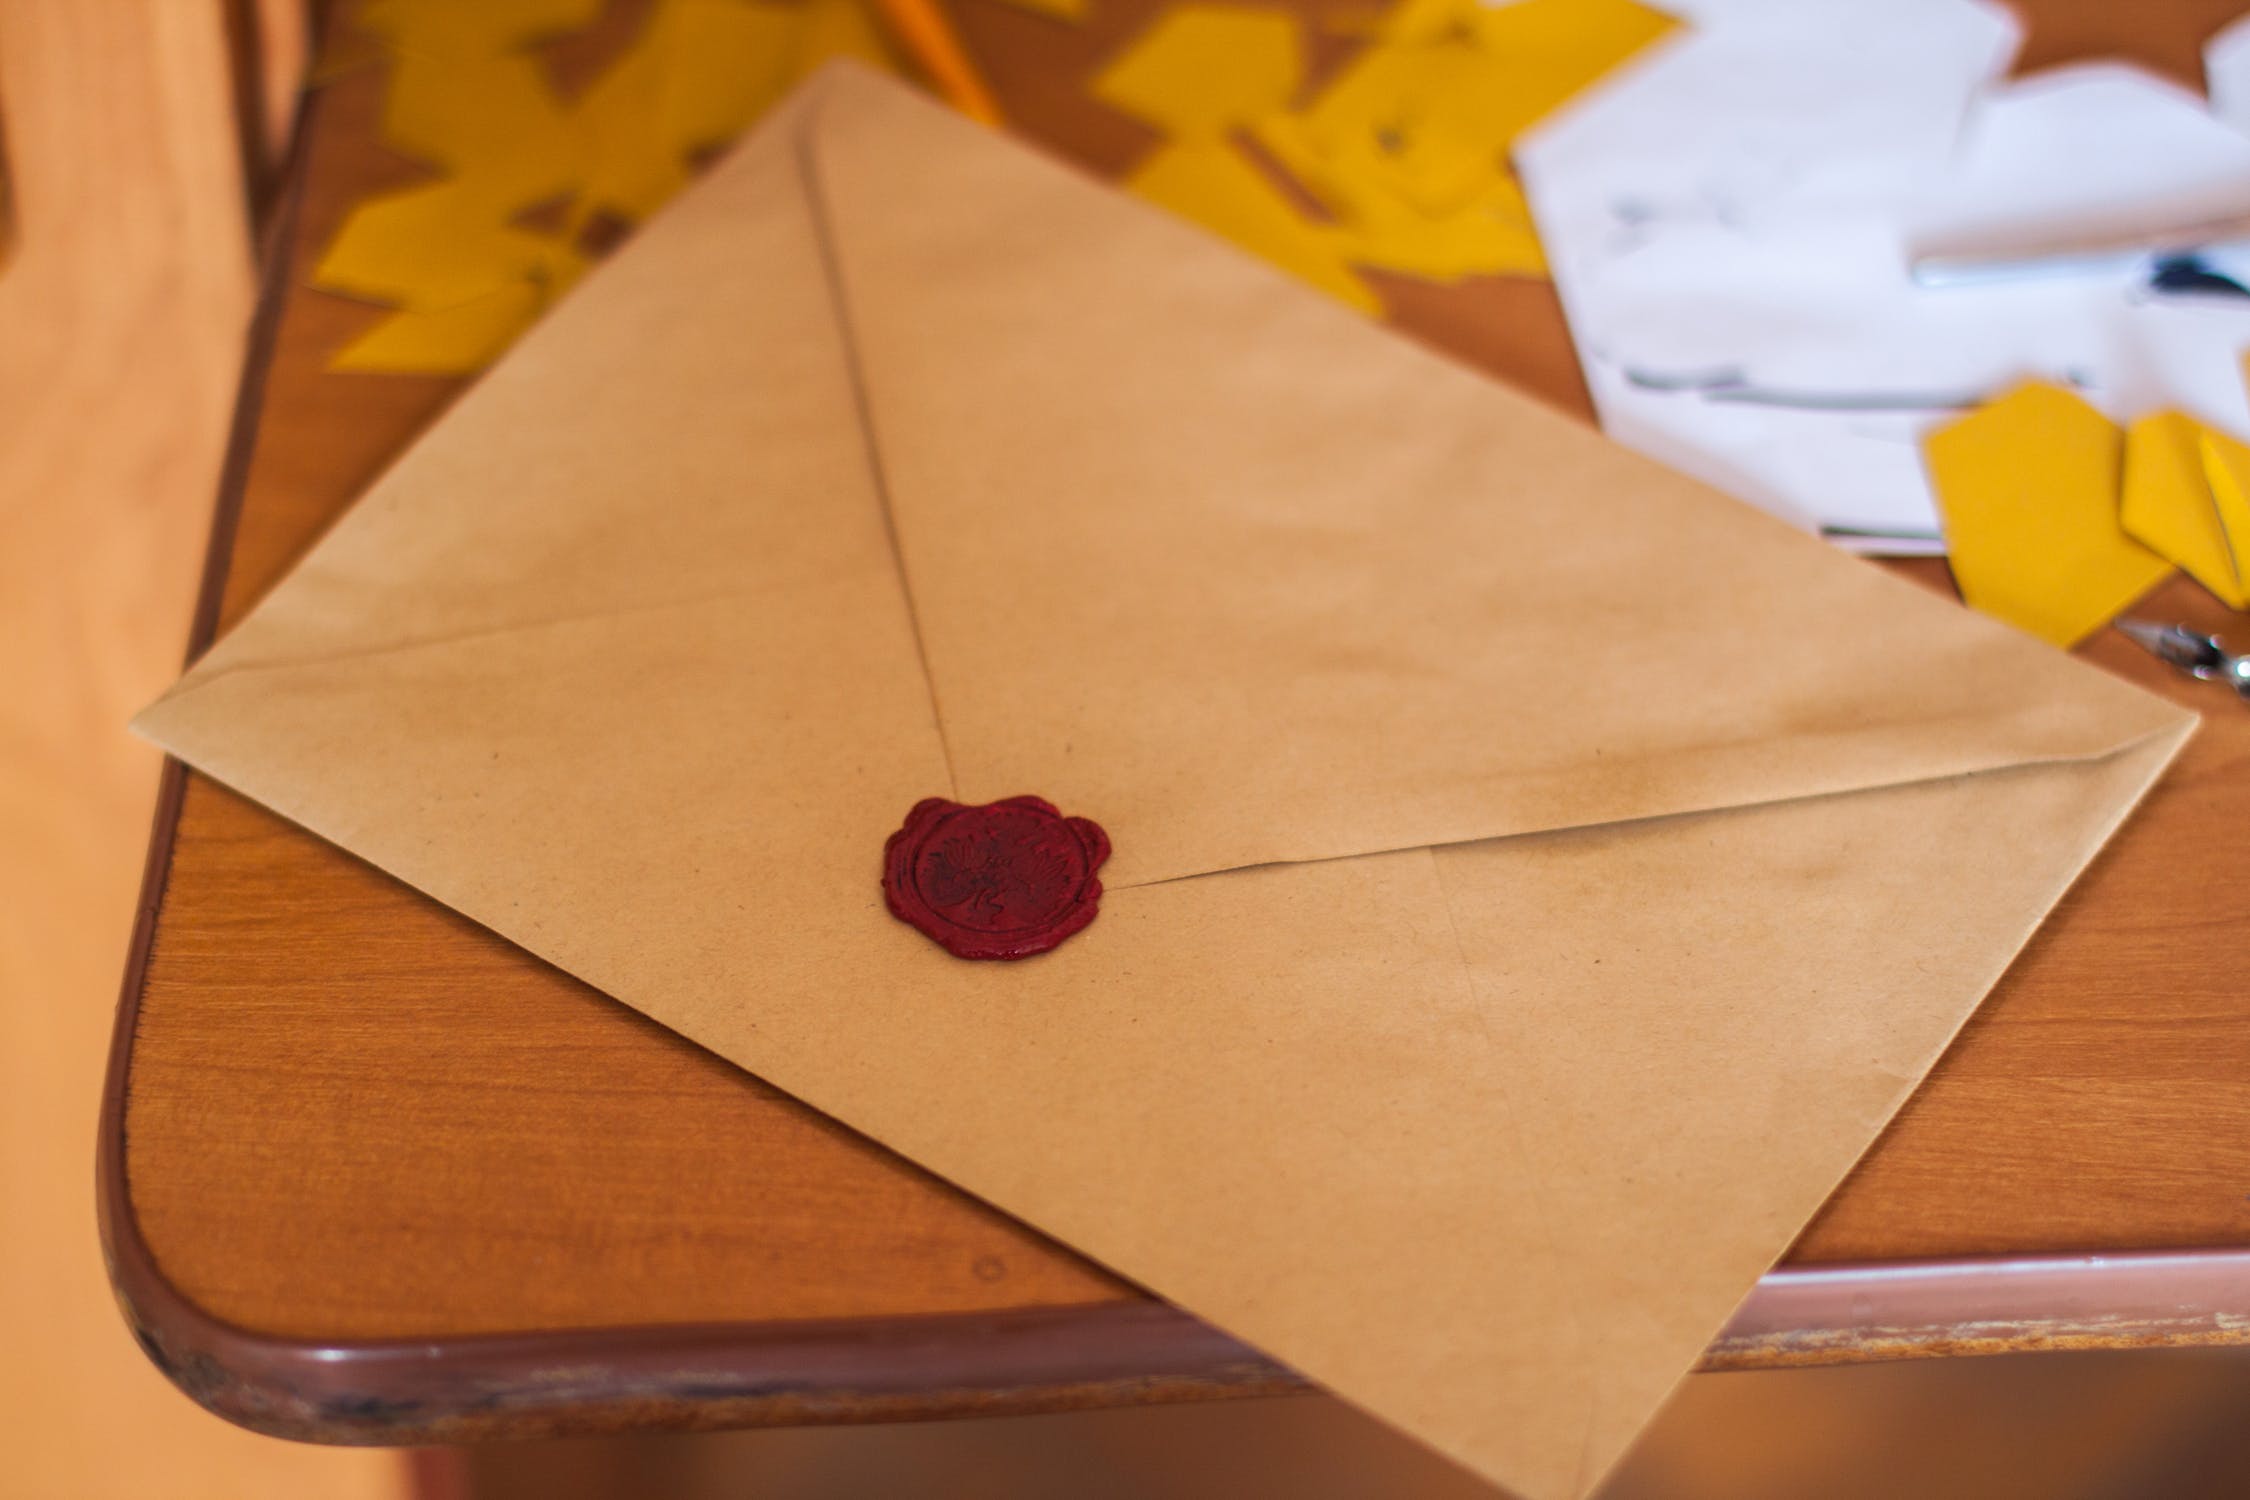 Gina found an old envelope taped under the cradle | Source: Pexels